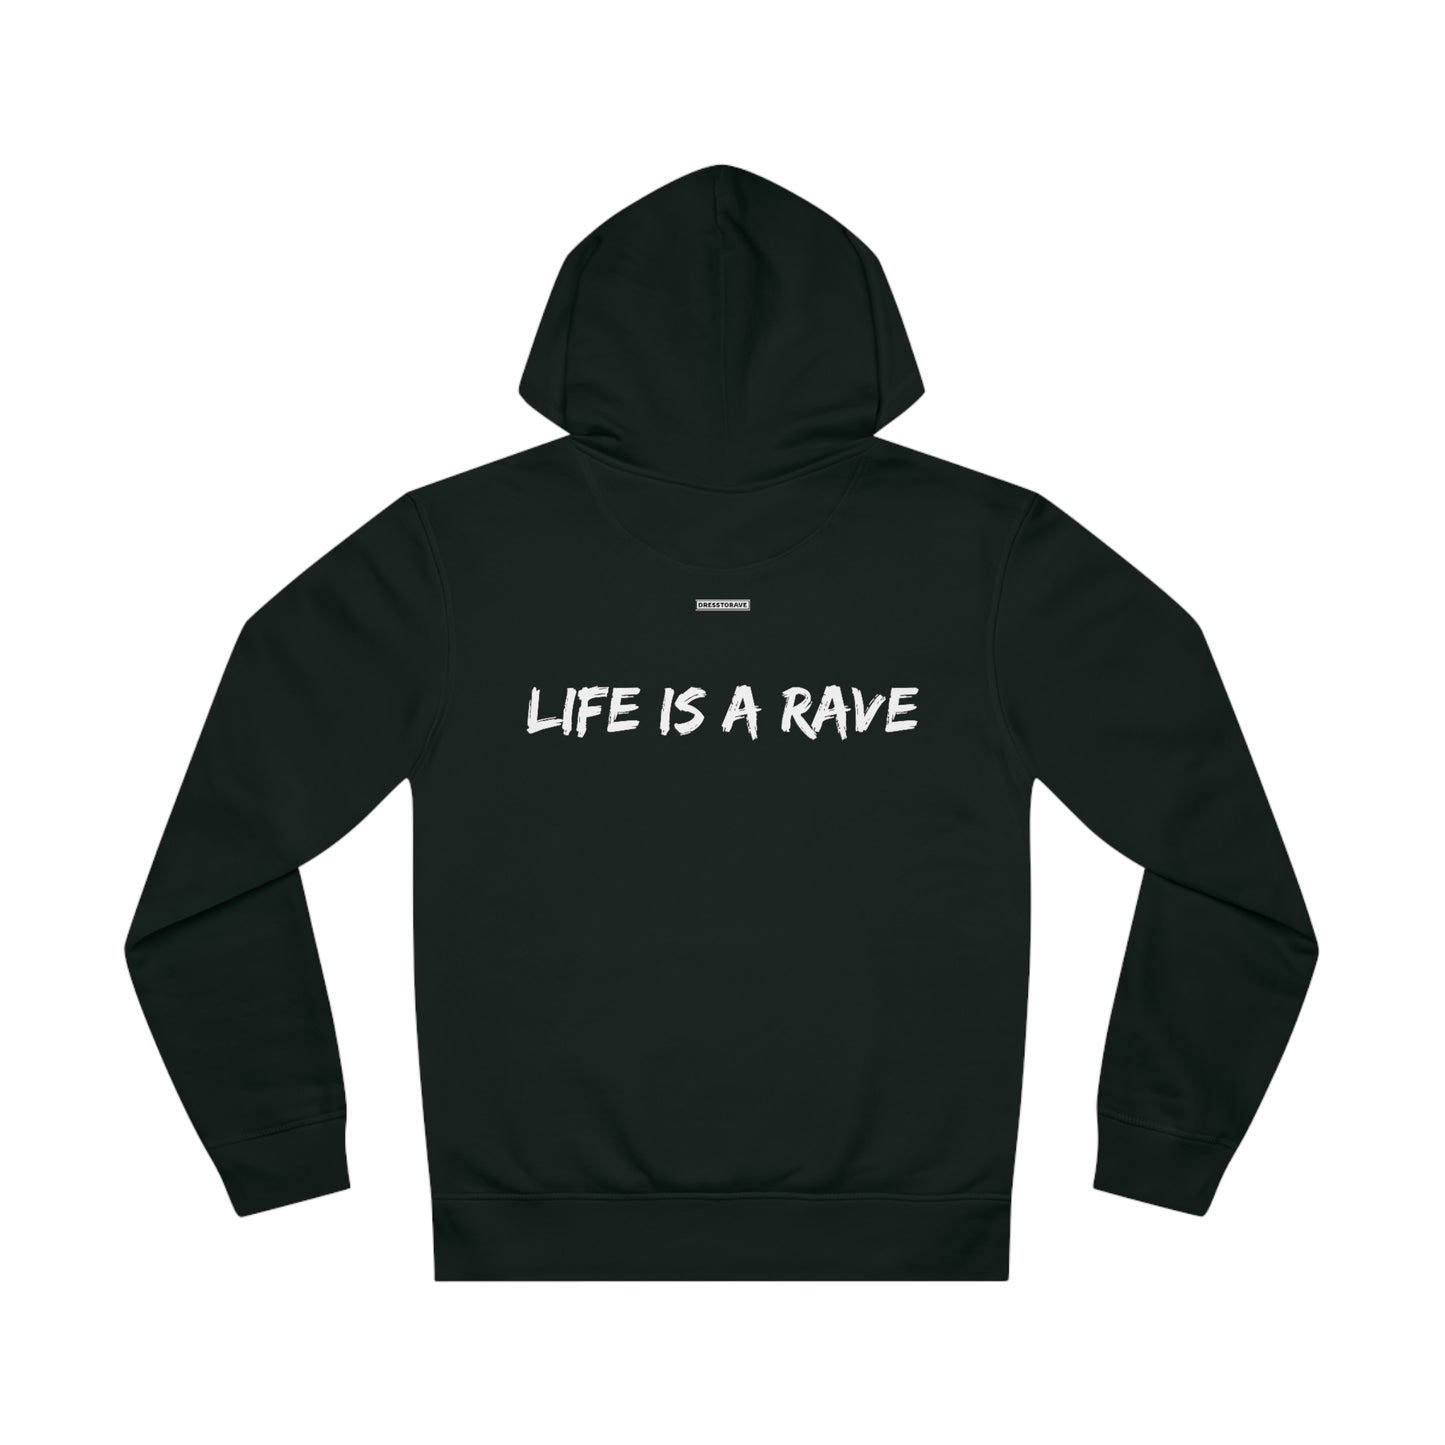 Life is a Rave - Organic Unisex Hoodie